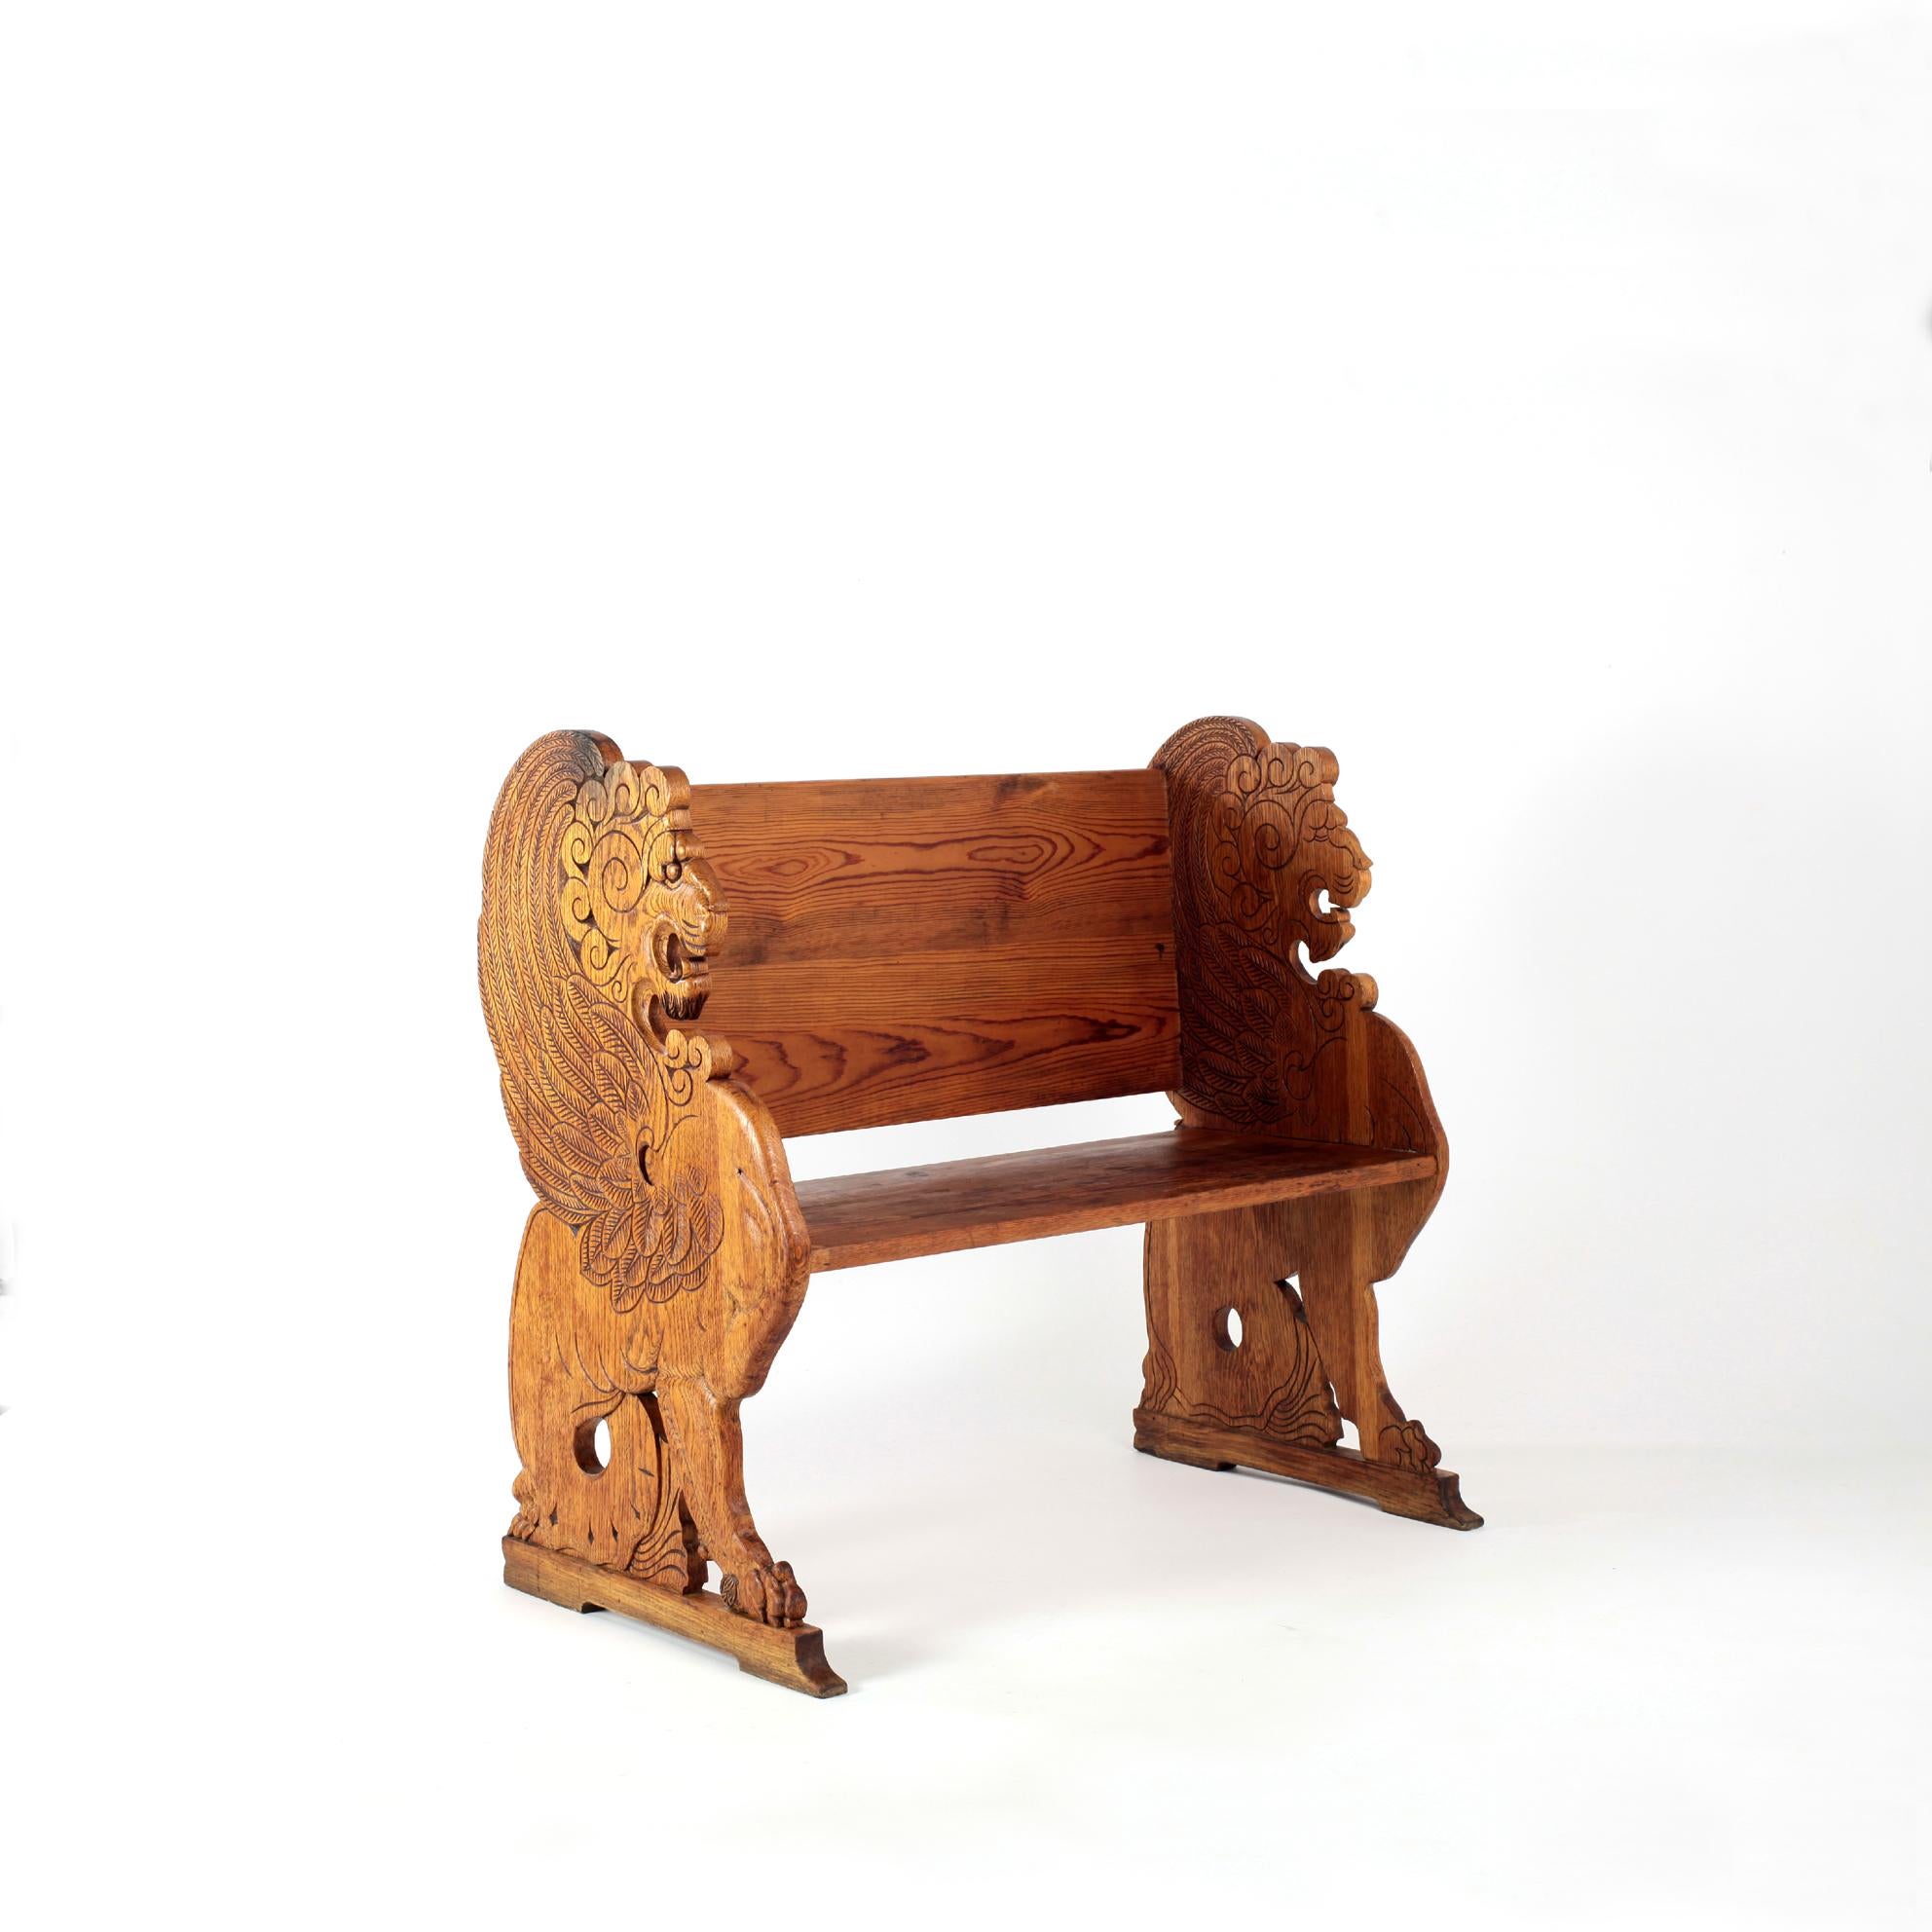 Stunning bench from the beginning of the 20th century in carved wood whose sides represent a lion. Made in Sweden, handmade in solid oak and pine with an incredible patina. Very nice presence for a very decorative piece.